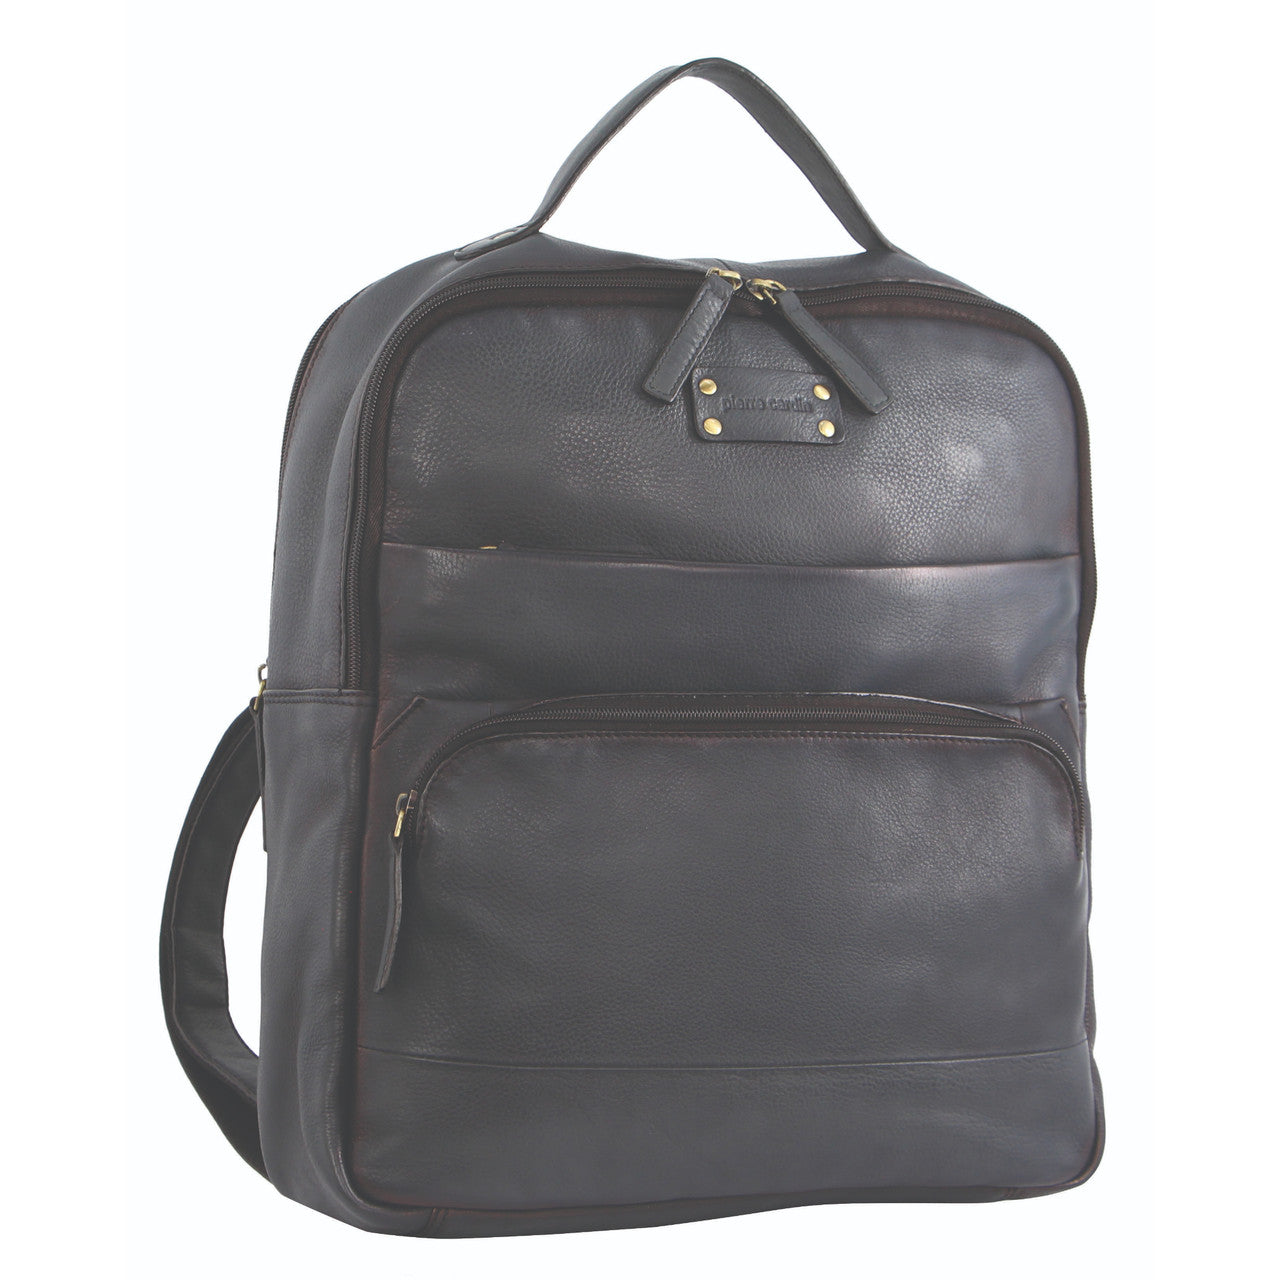 PIERRE CARDIN PC2808 Black RUSTIC LEATHER LARGE BACKPACK-1